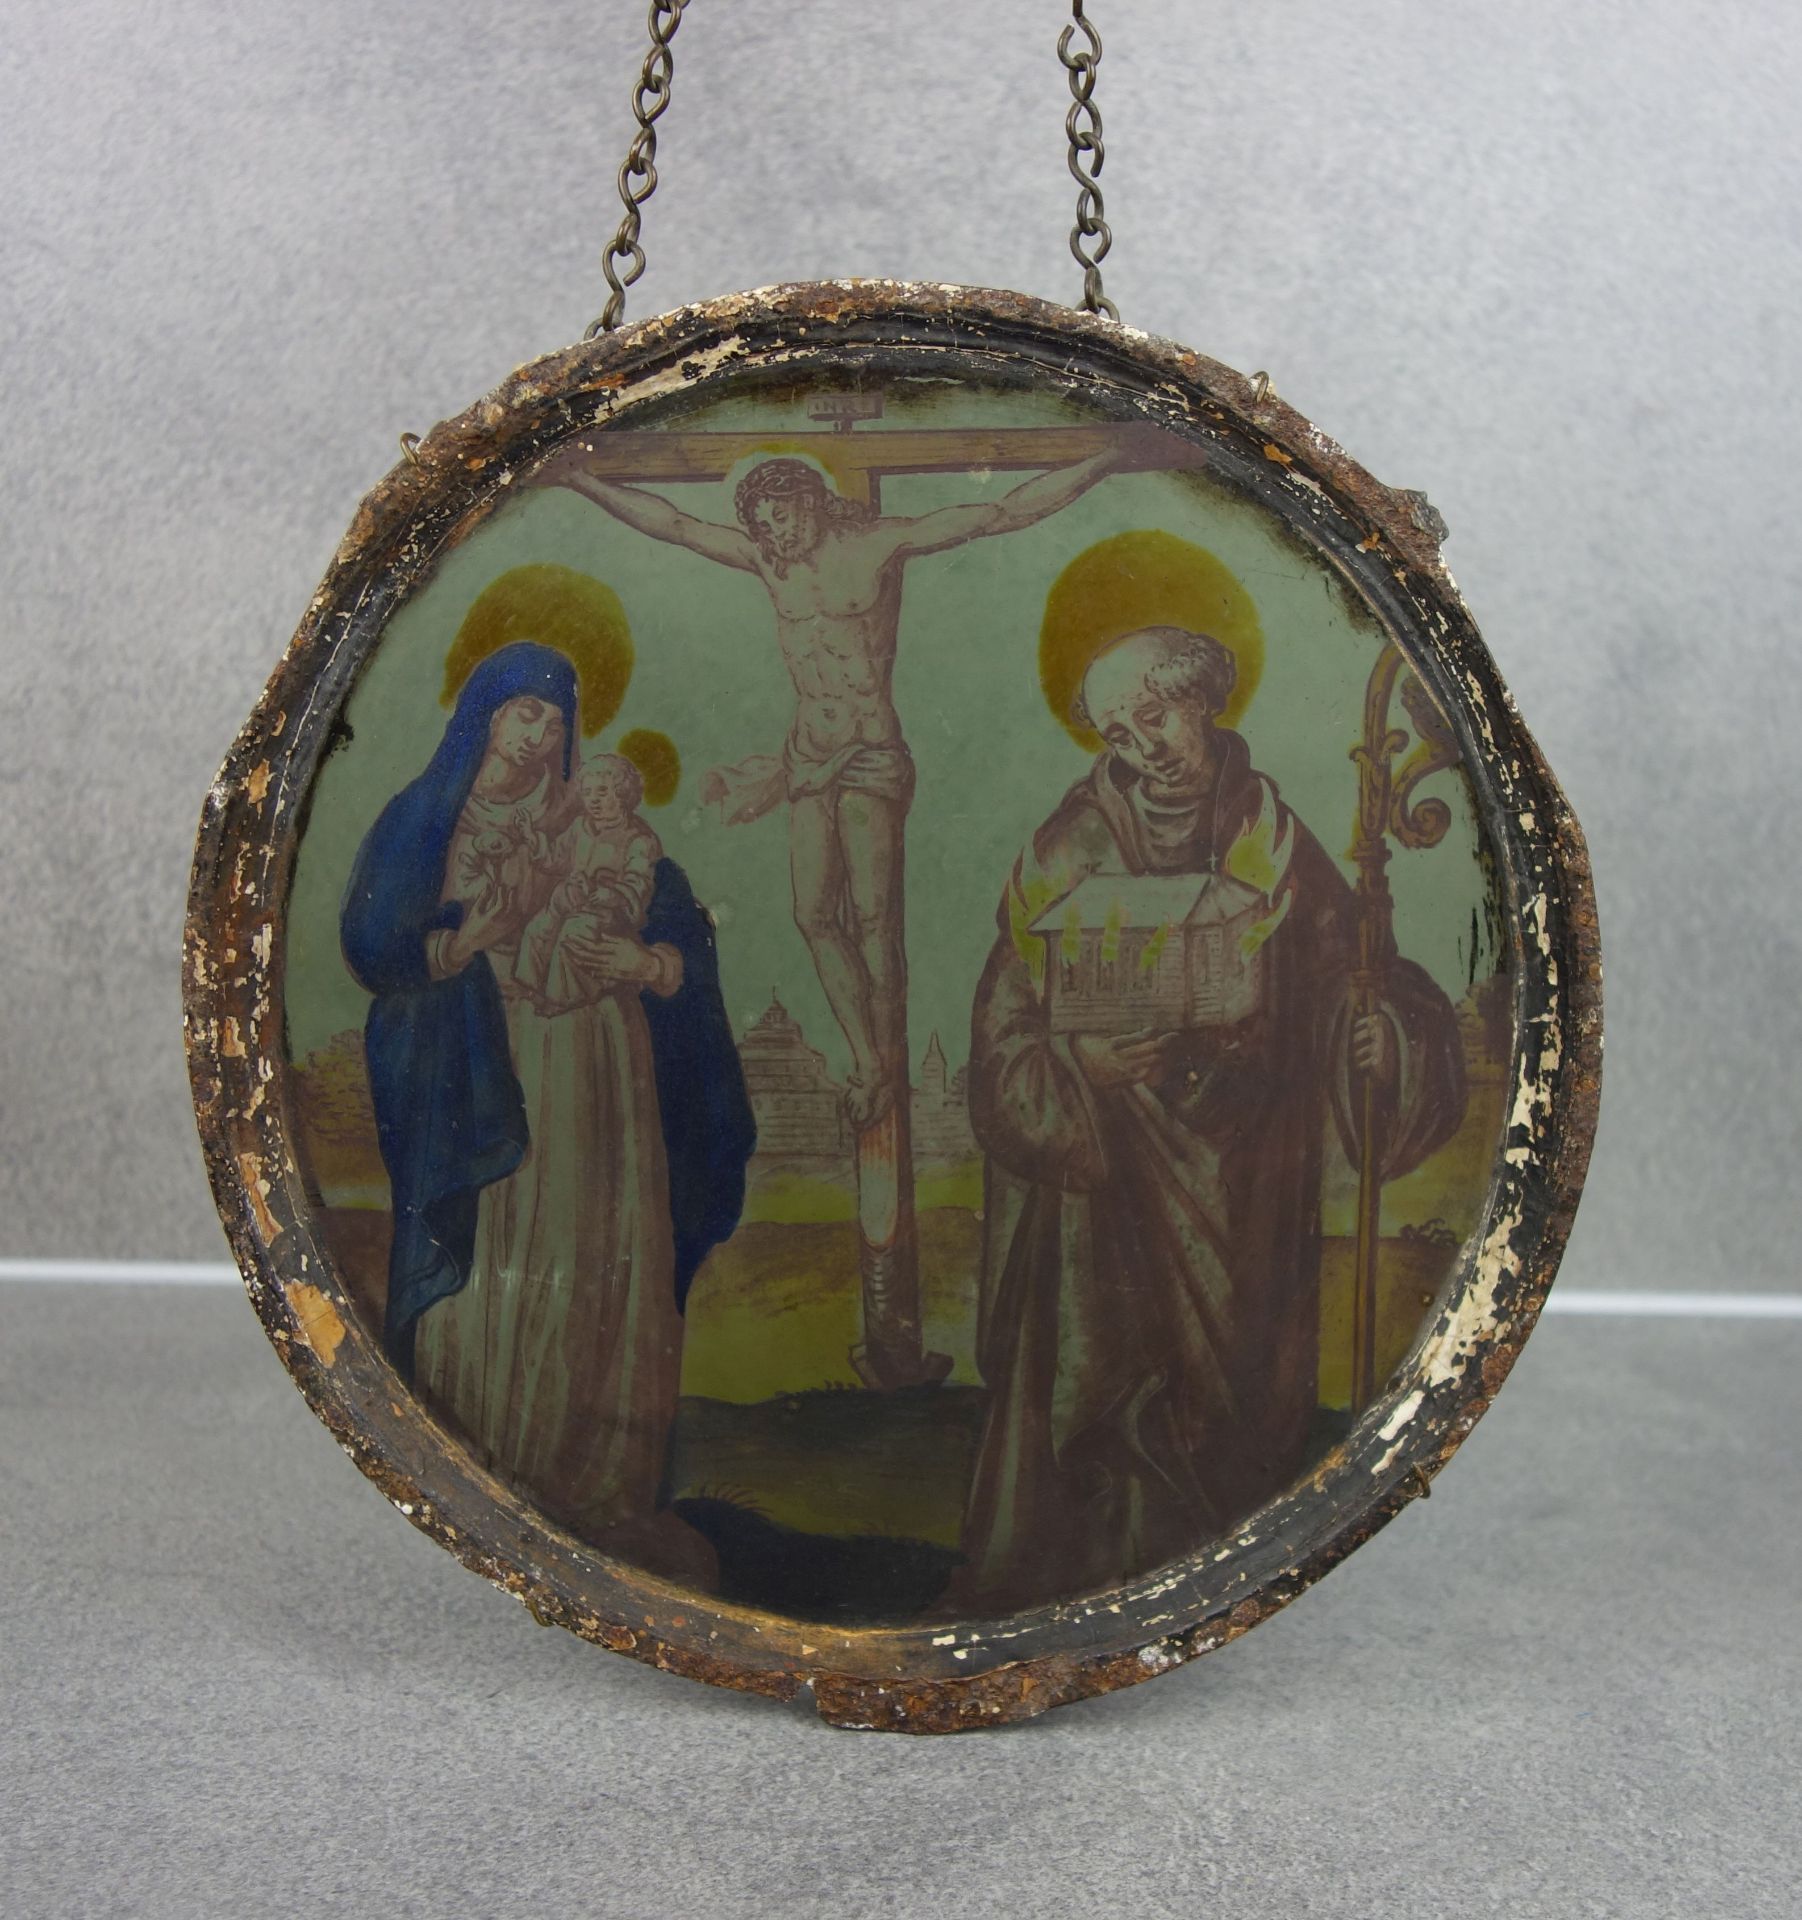 RELIGIOUS CABINET PANE / STAINED GLASS ON ROUND PANE - Image 2 of 7